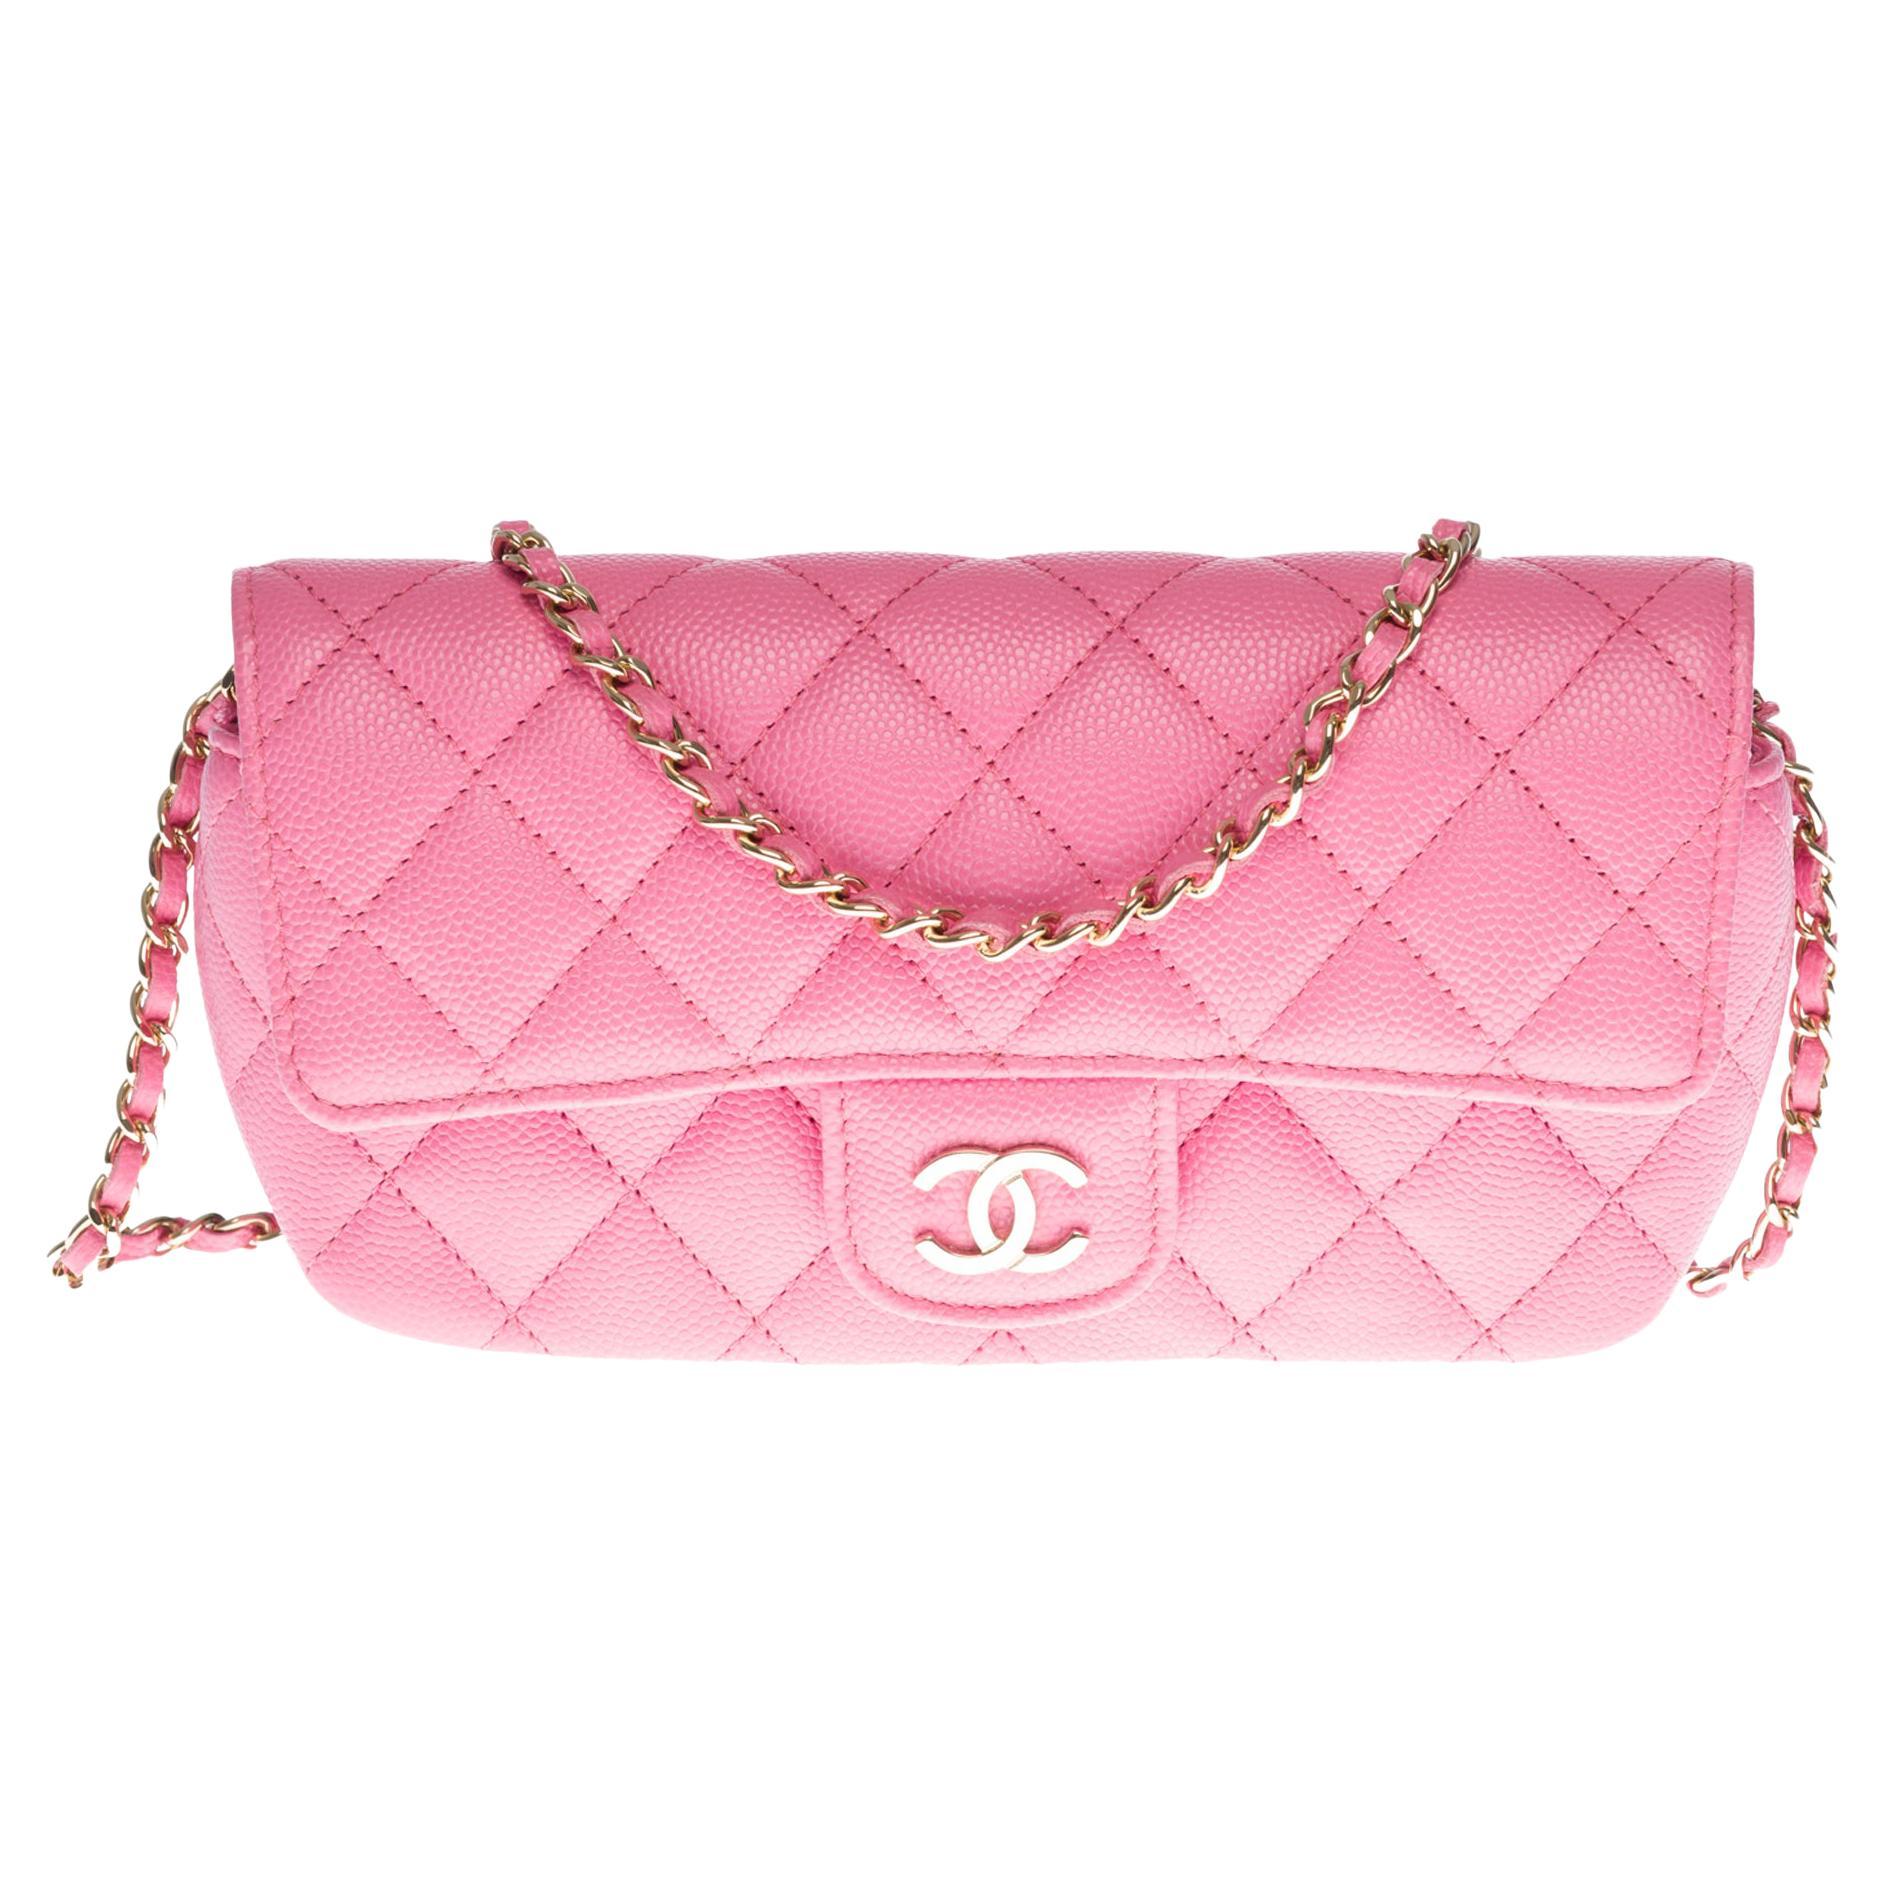 Chanel Classique Sunglasses Bag/Case in pink caviar quilted